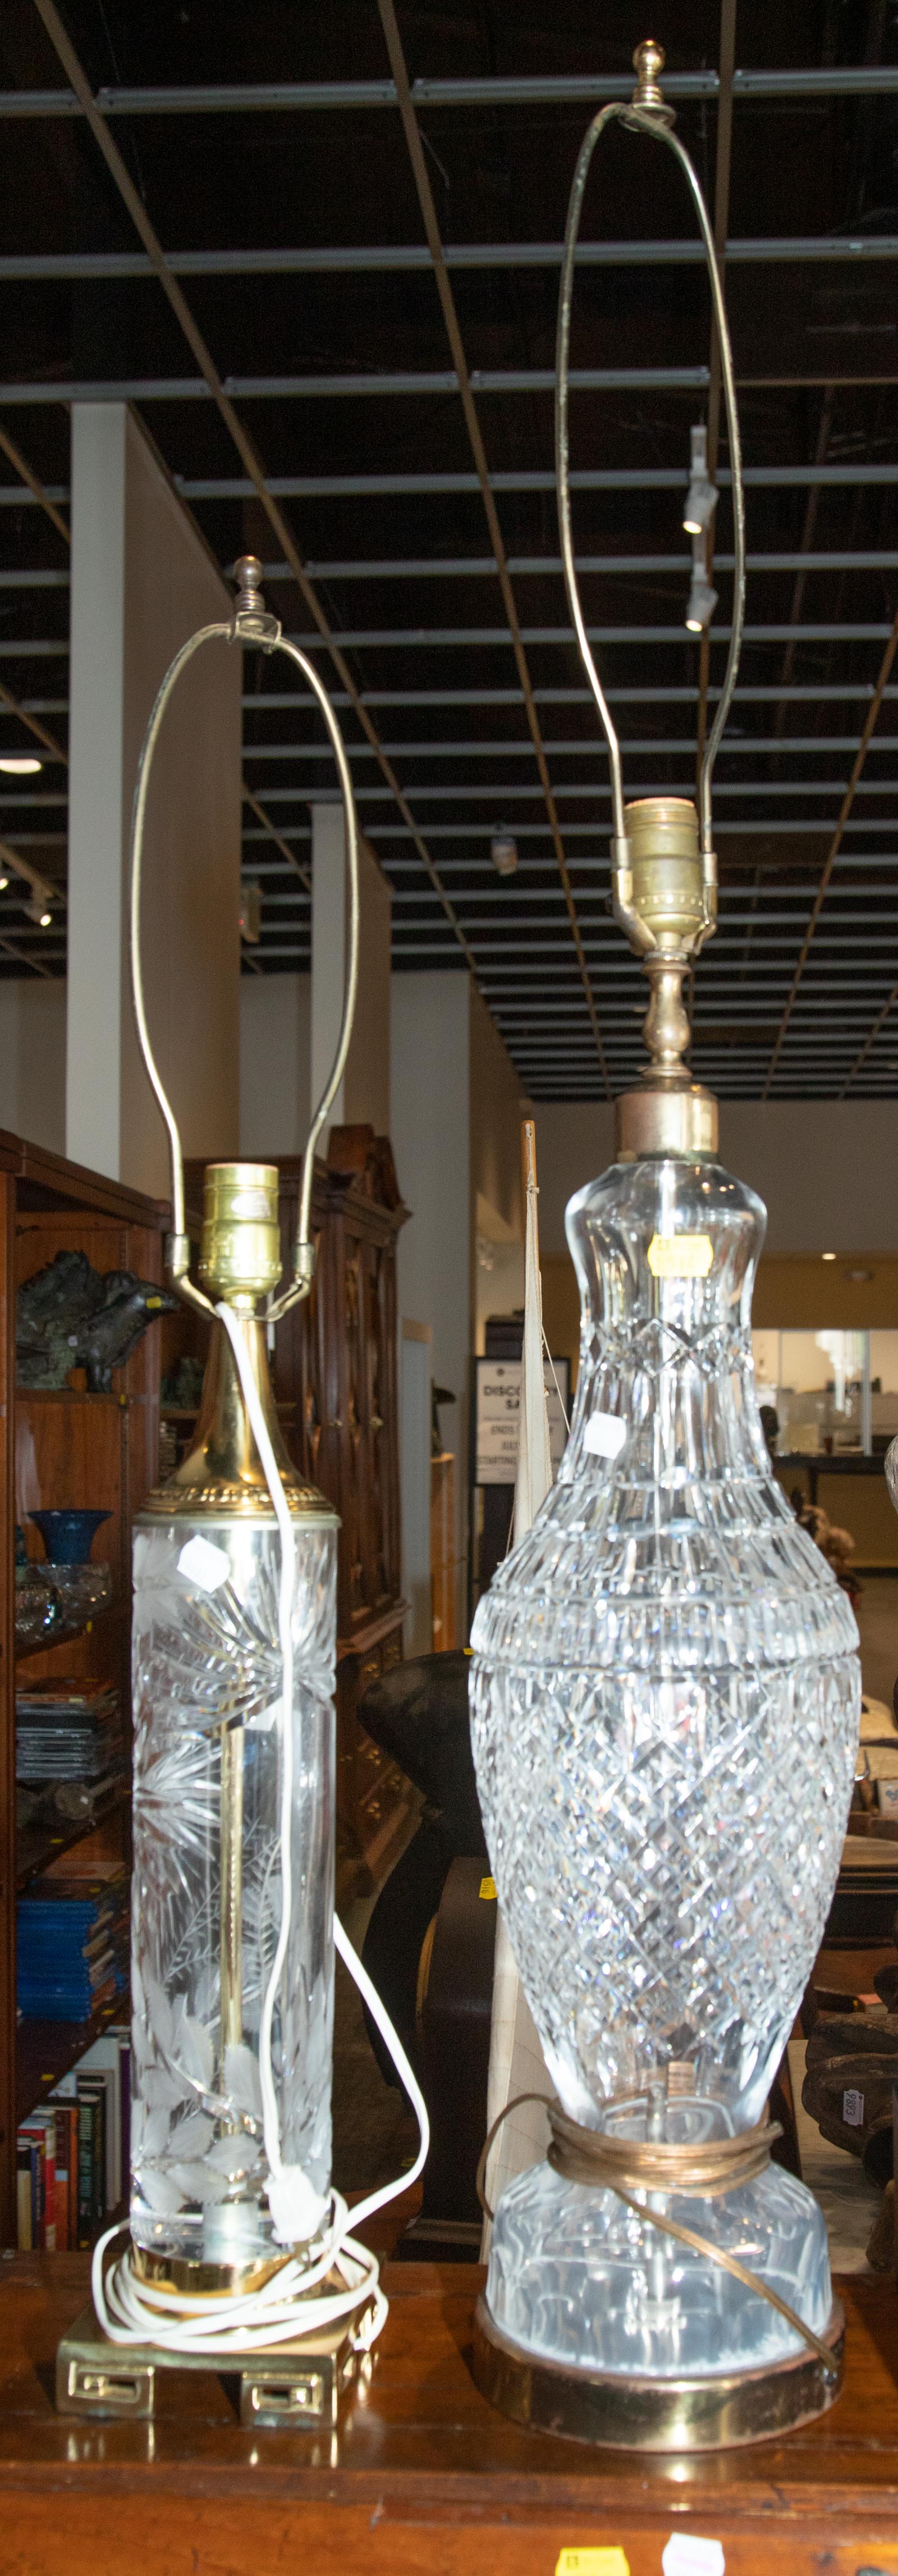 TWO CUT GLASS LAMPS Pressed cut